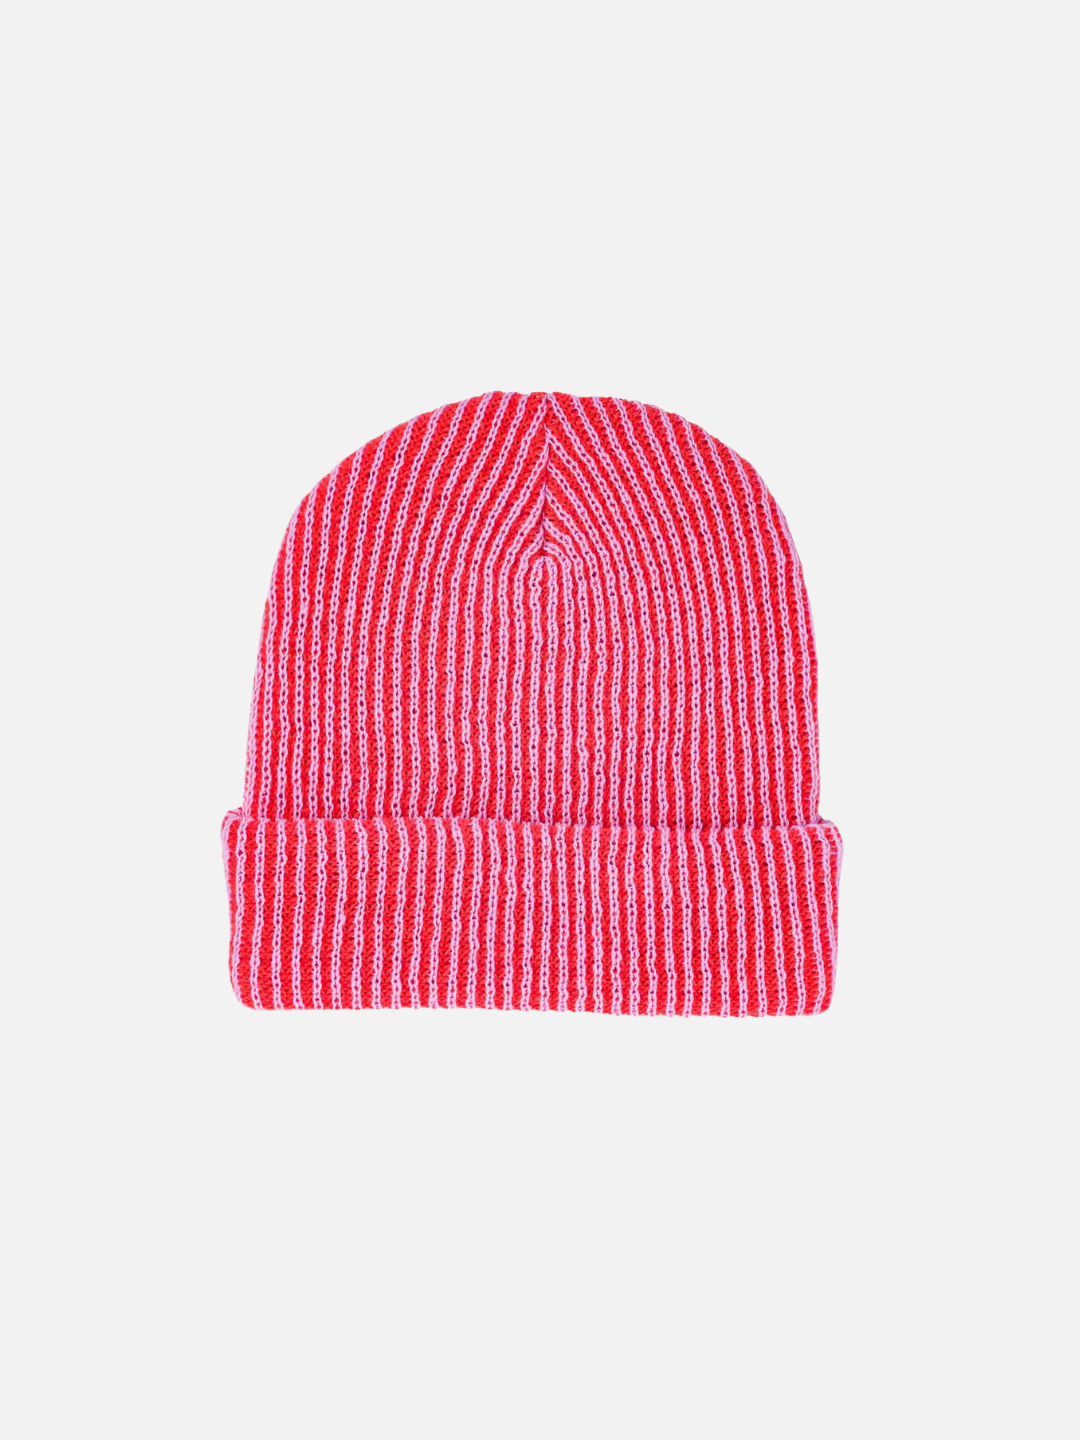 Poppy/Lilac | Front view of a bright pink ribbed beanie for big kids and adults, with a ribbed cuff. The ribbed texture reveals a second yarn color that's lilac pink.